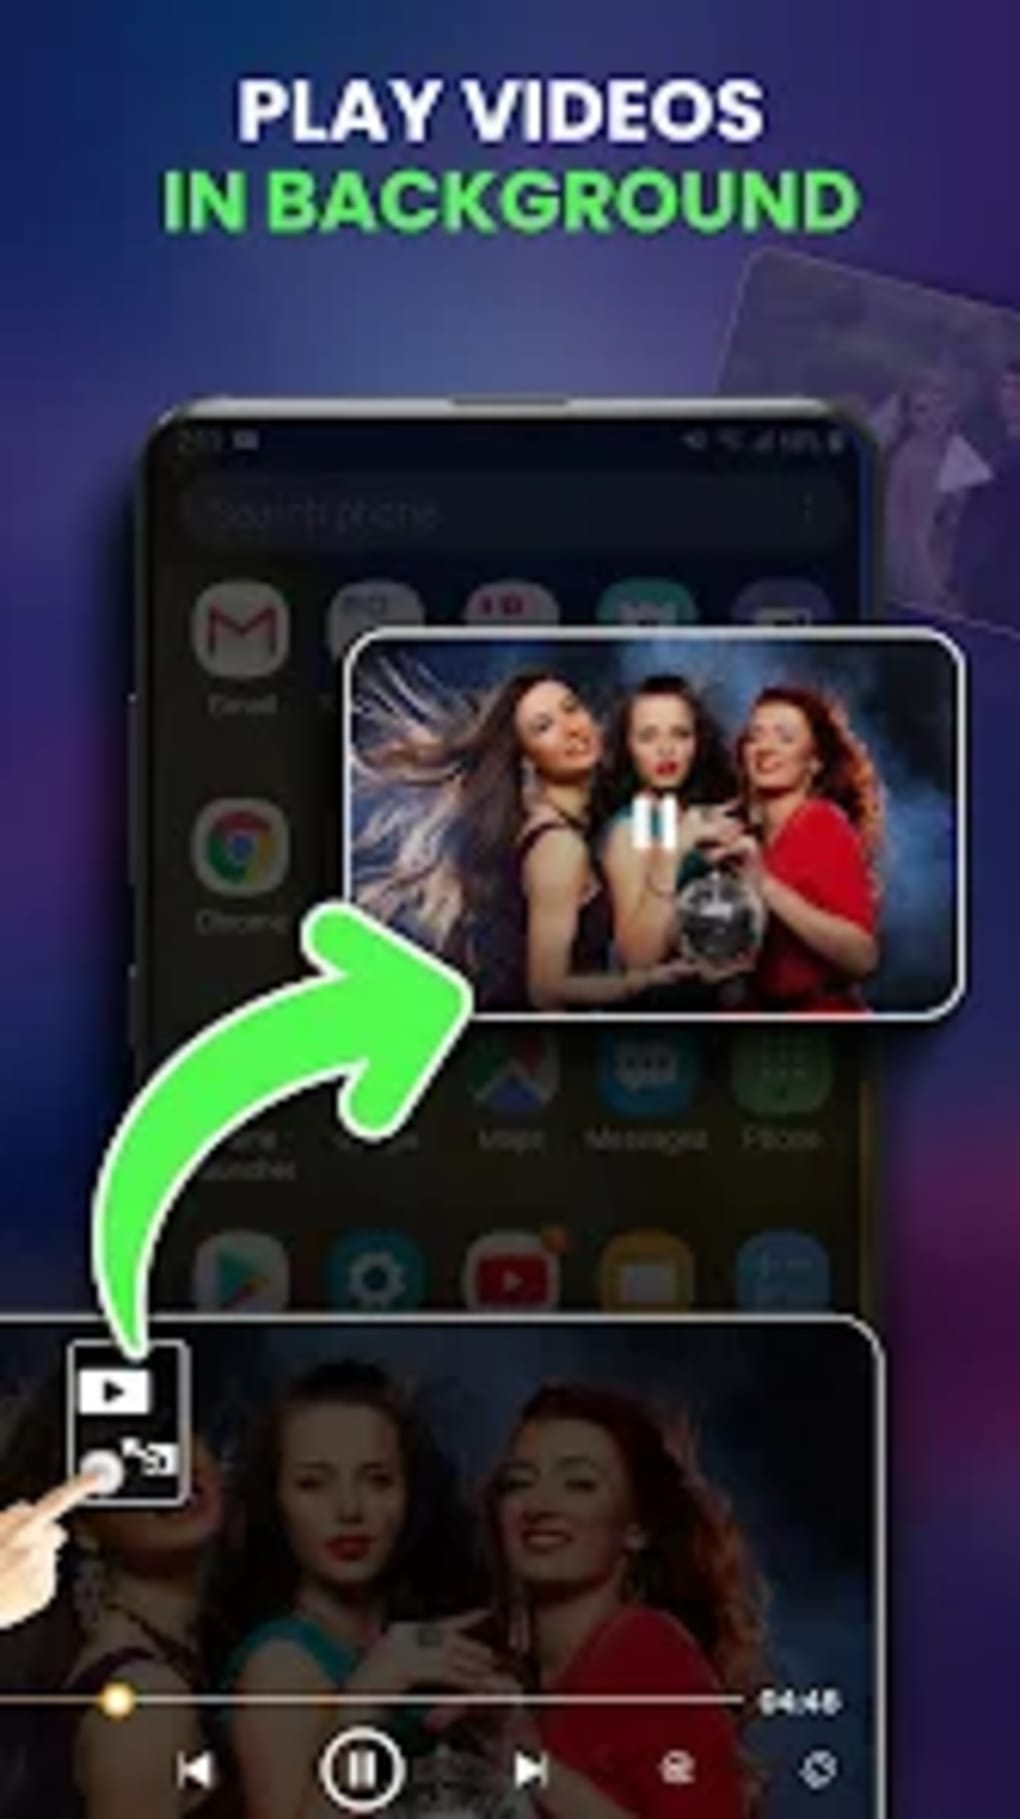 All Video Player Media Player for Android - Download